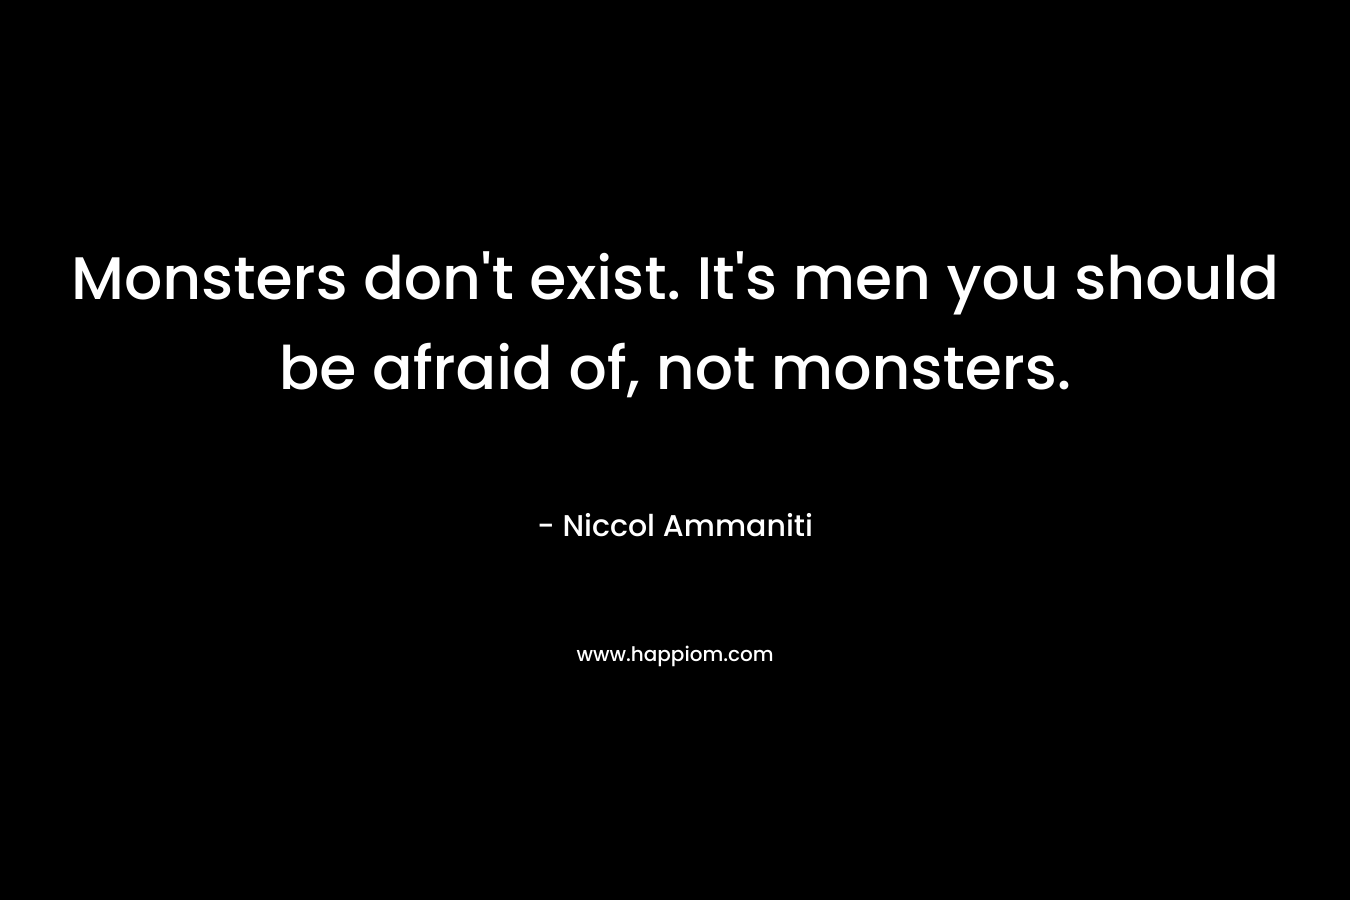 Monsters don't exist. It's men you should be afraid of, not monsters.